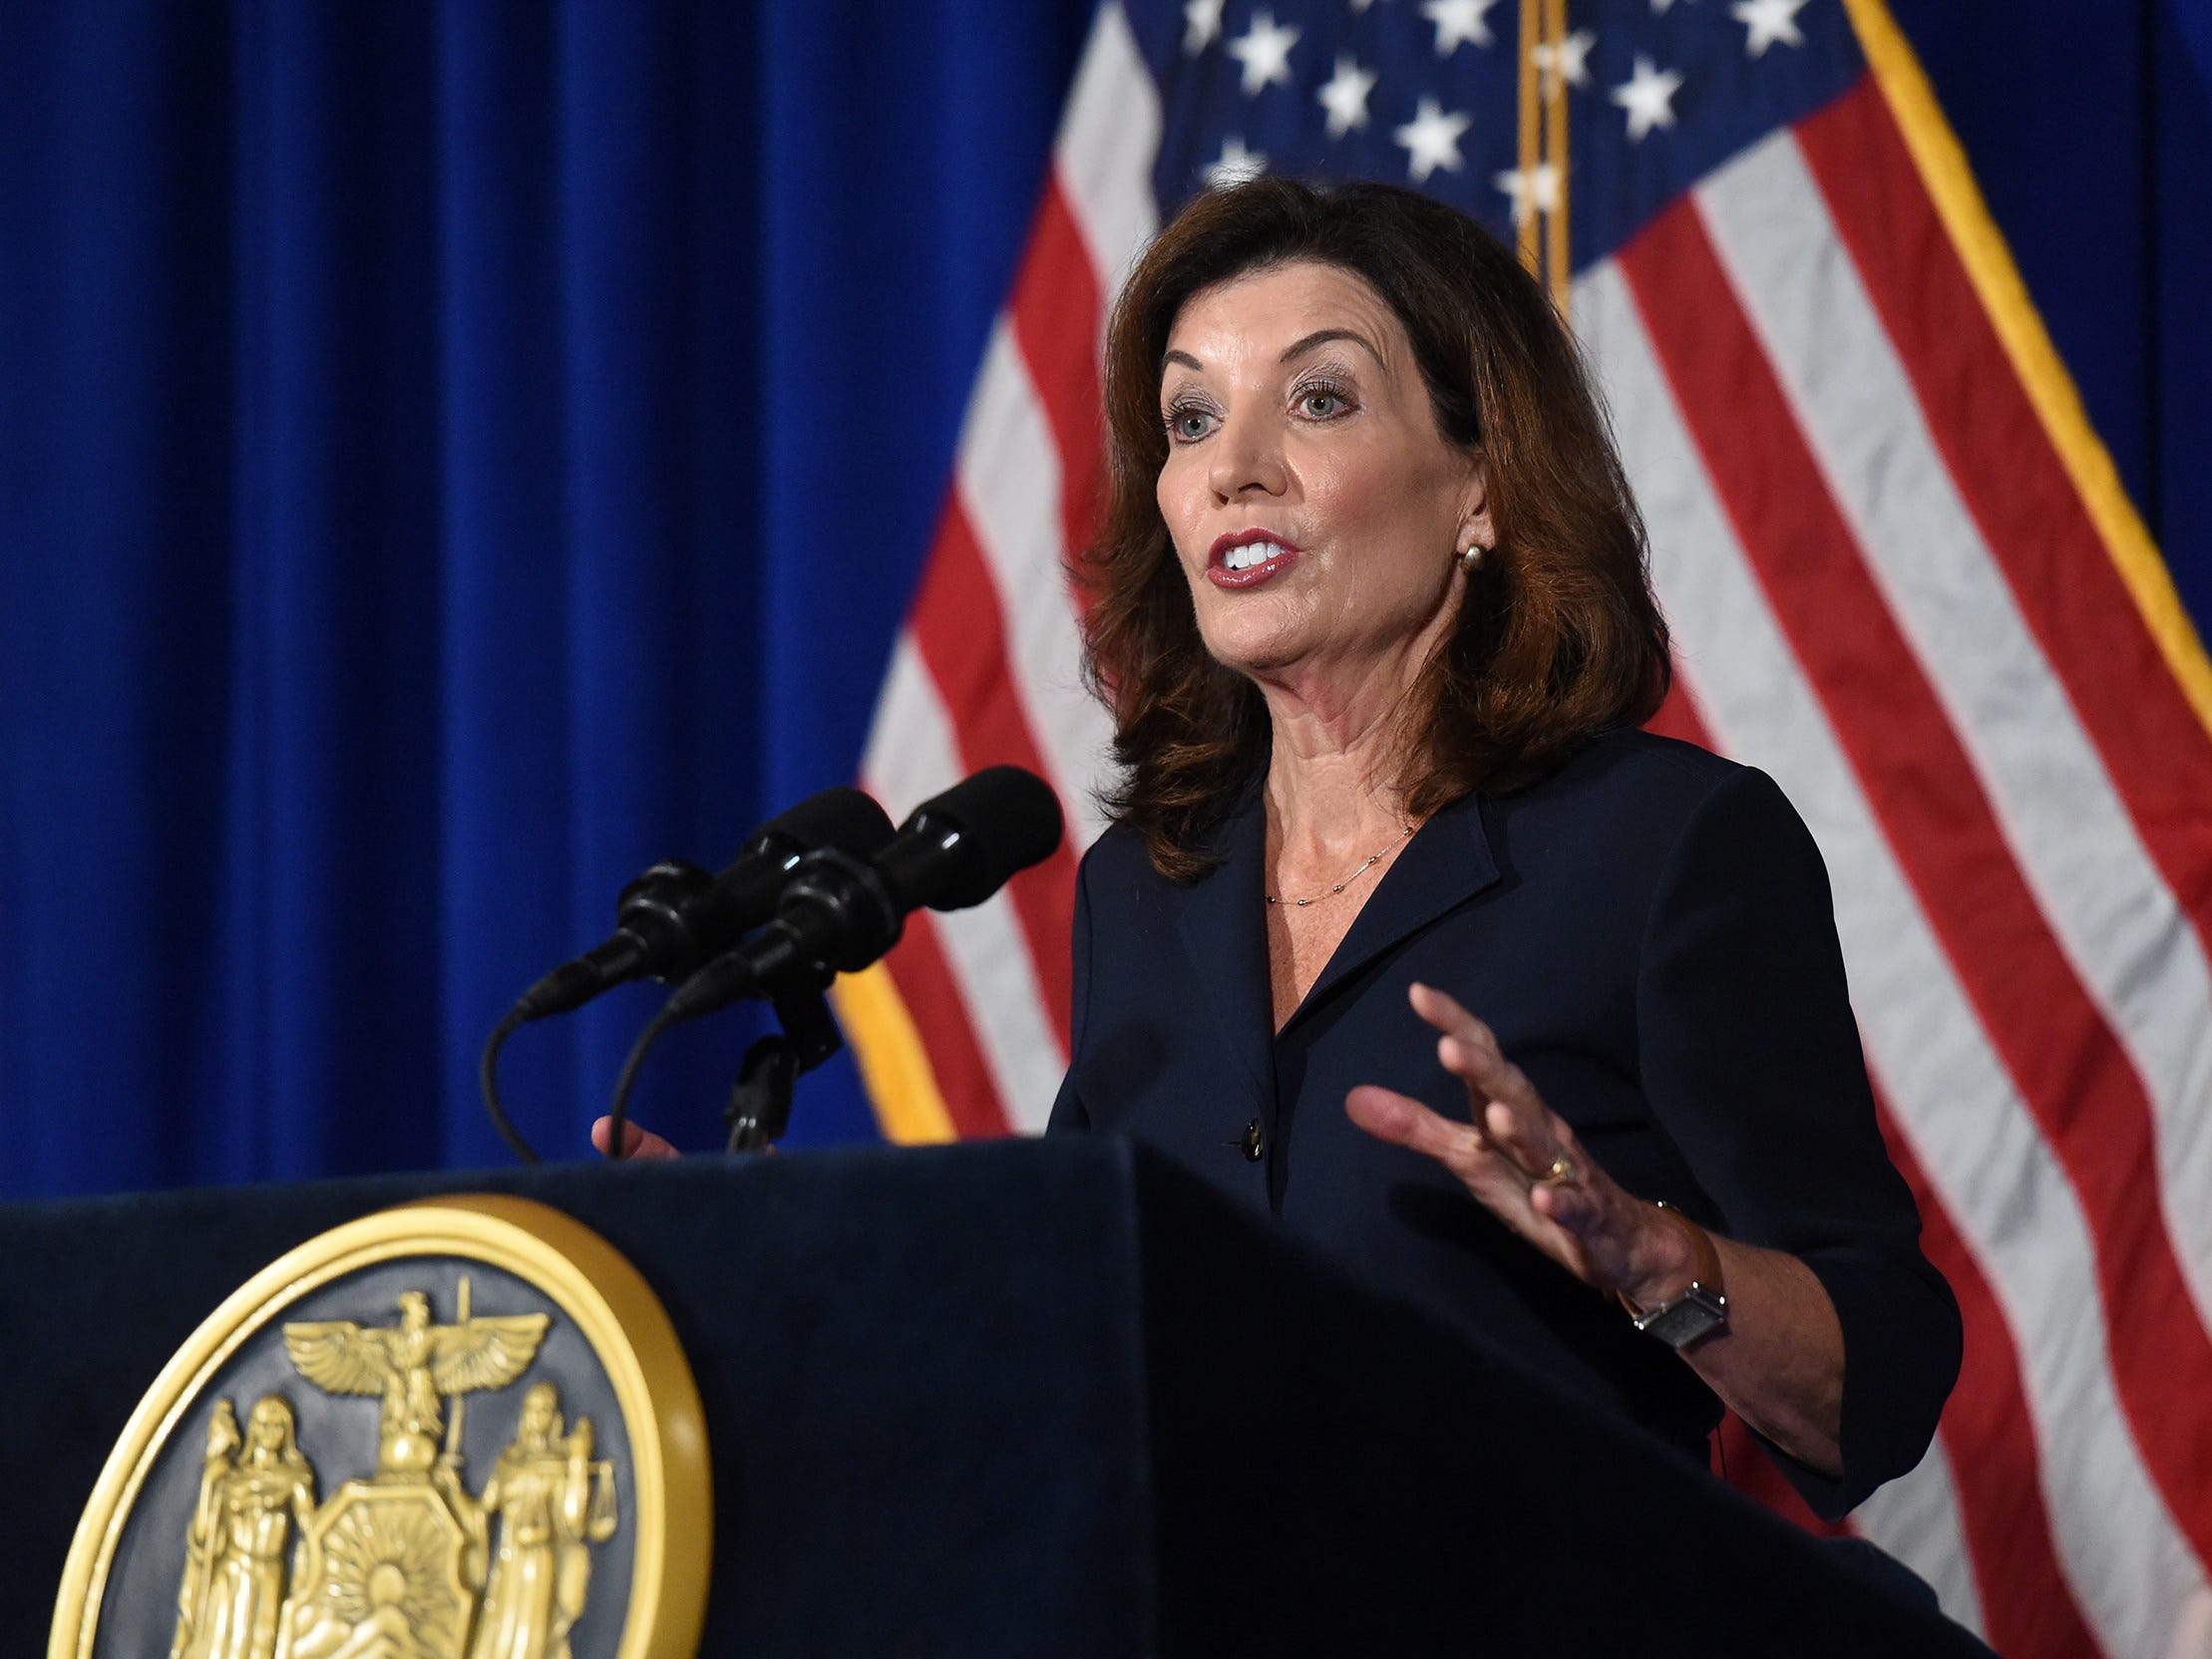 New York Lieutenant Governor Kathy Hochul speaks during a news conference the day after Governor Andrew Cuomo announced his resignation at the New York State Capitol, in Albany, New York, U.S., August 11, 2021.